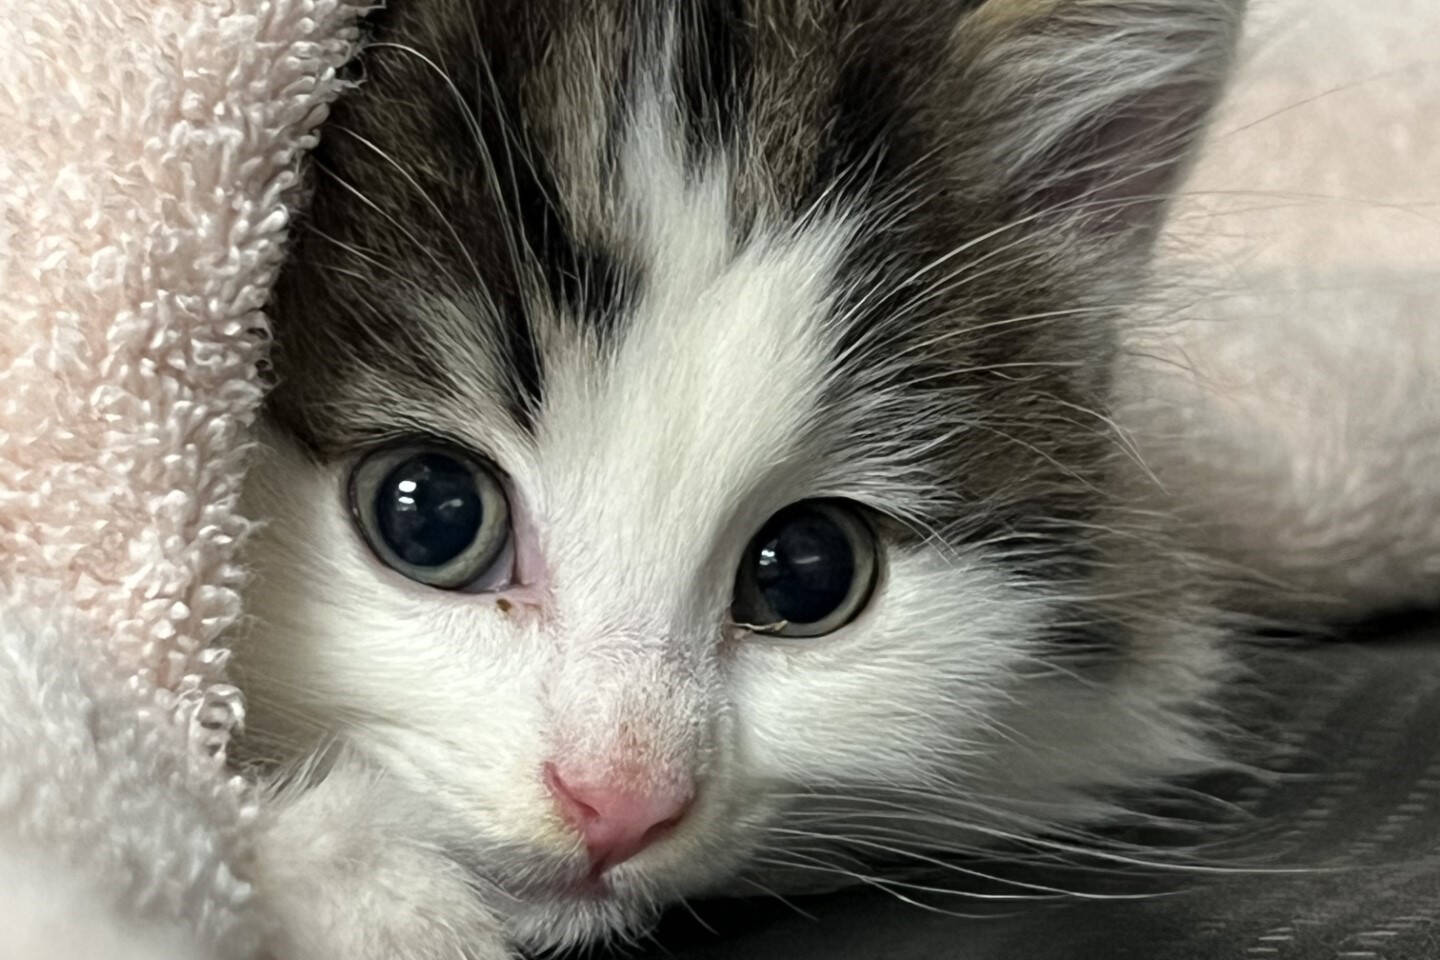 Haddie, a six-week-old kitten, was found in a garage with a badly broken and infected leg. She had to have the leg removed and is now recovering before getting ready for adoption. (BC SPCA)